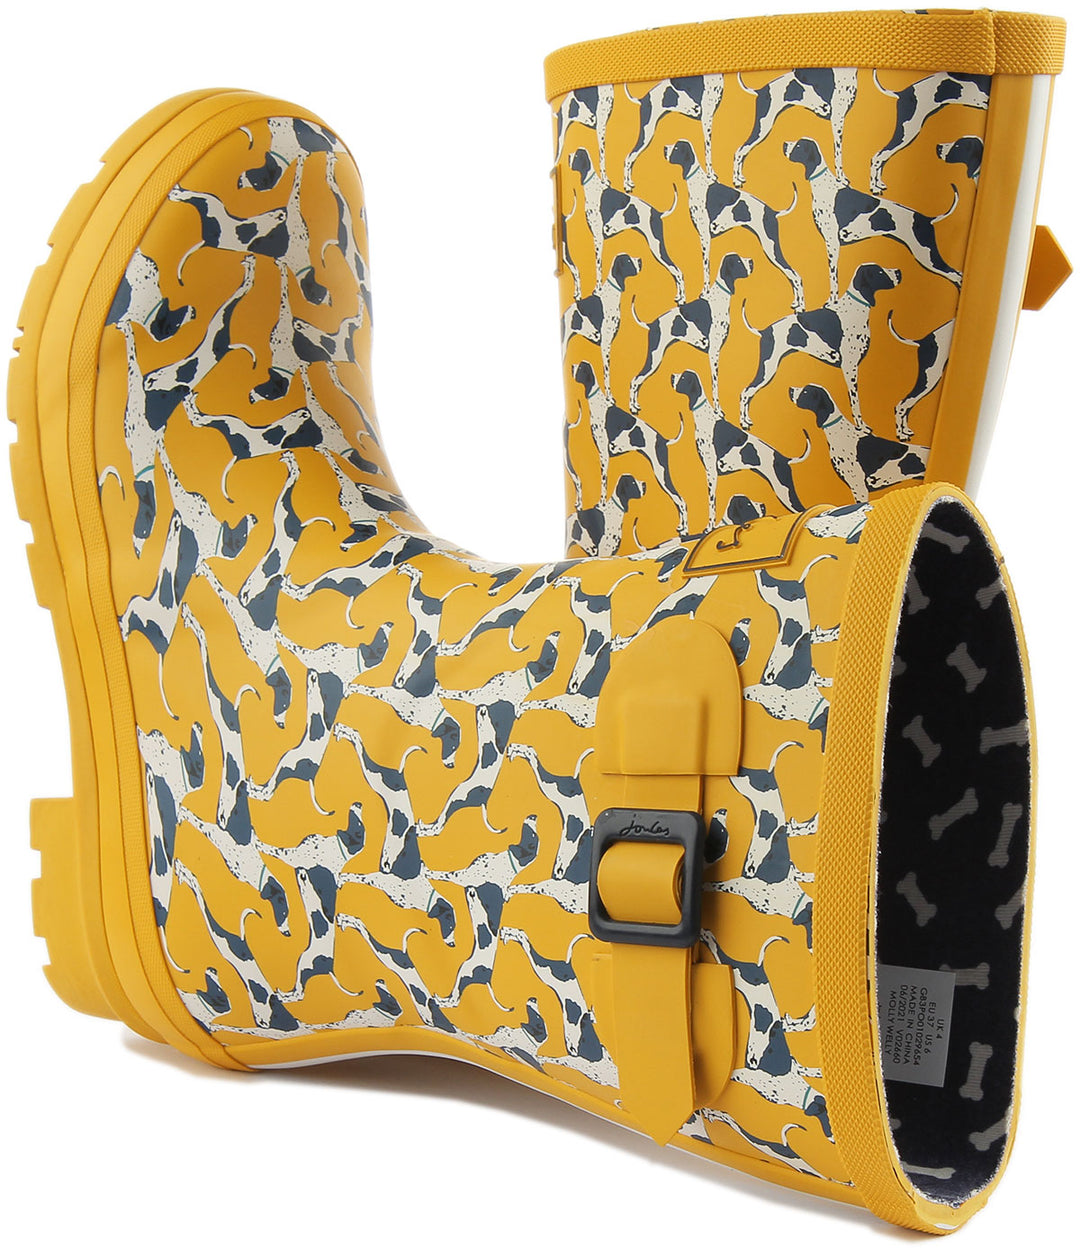 Joules Molly Welly In Yellow For Women